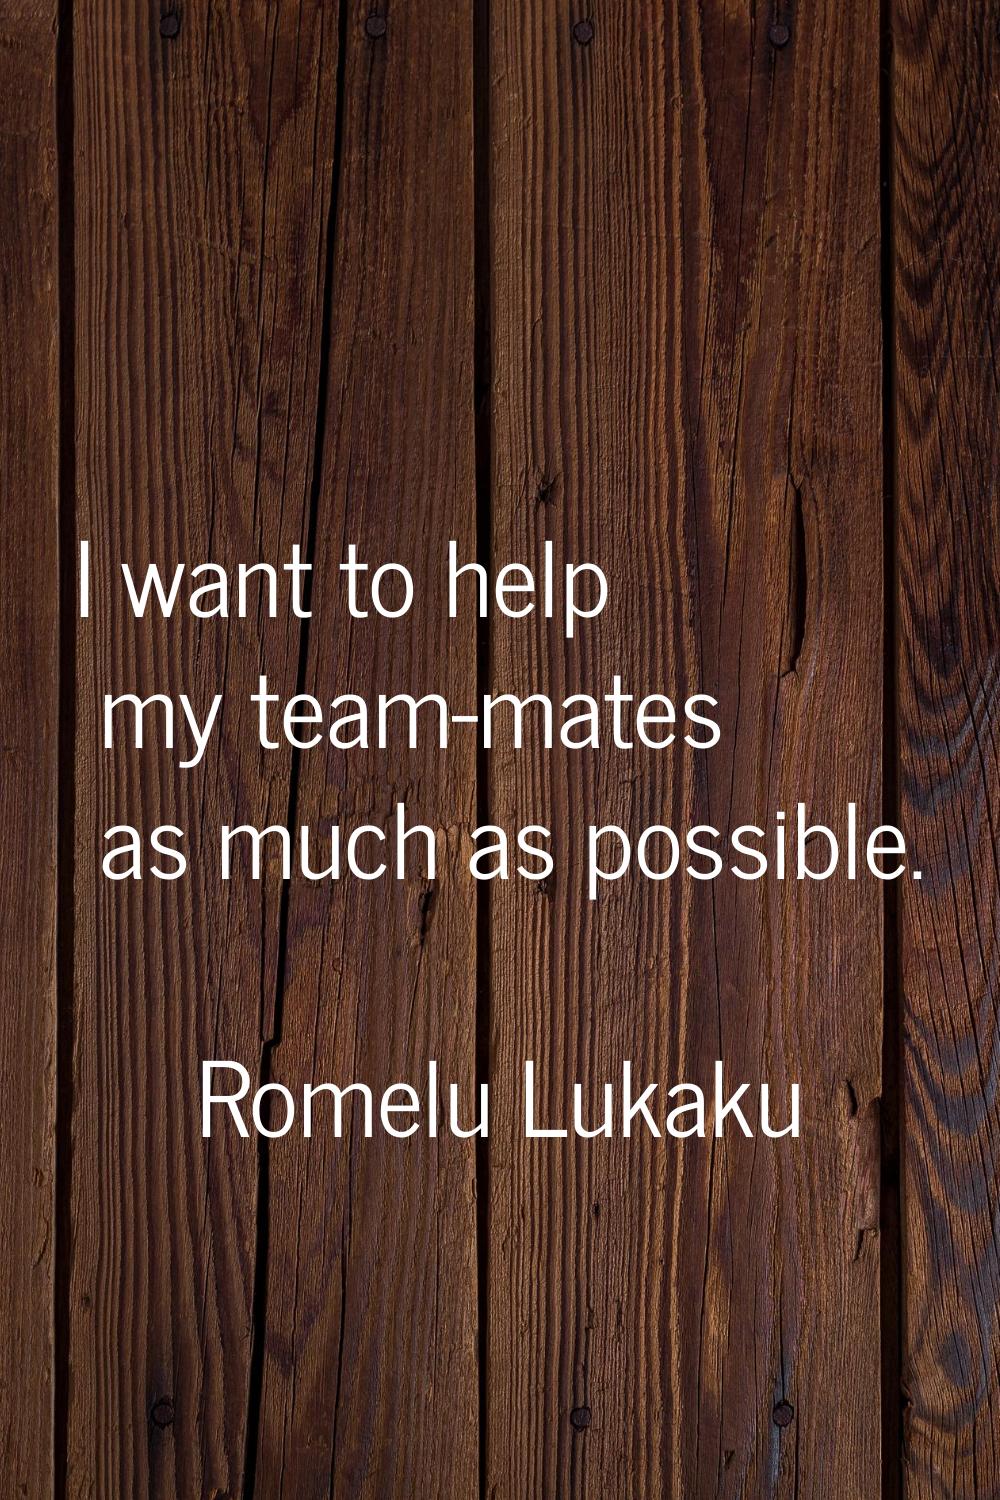 I want to help my team-mates as much as possible.